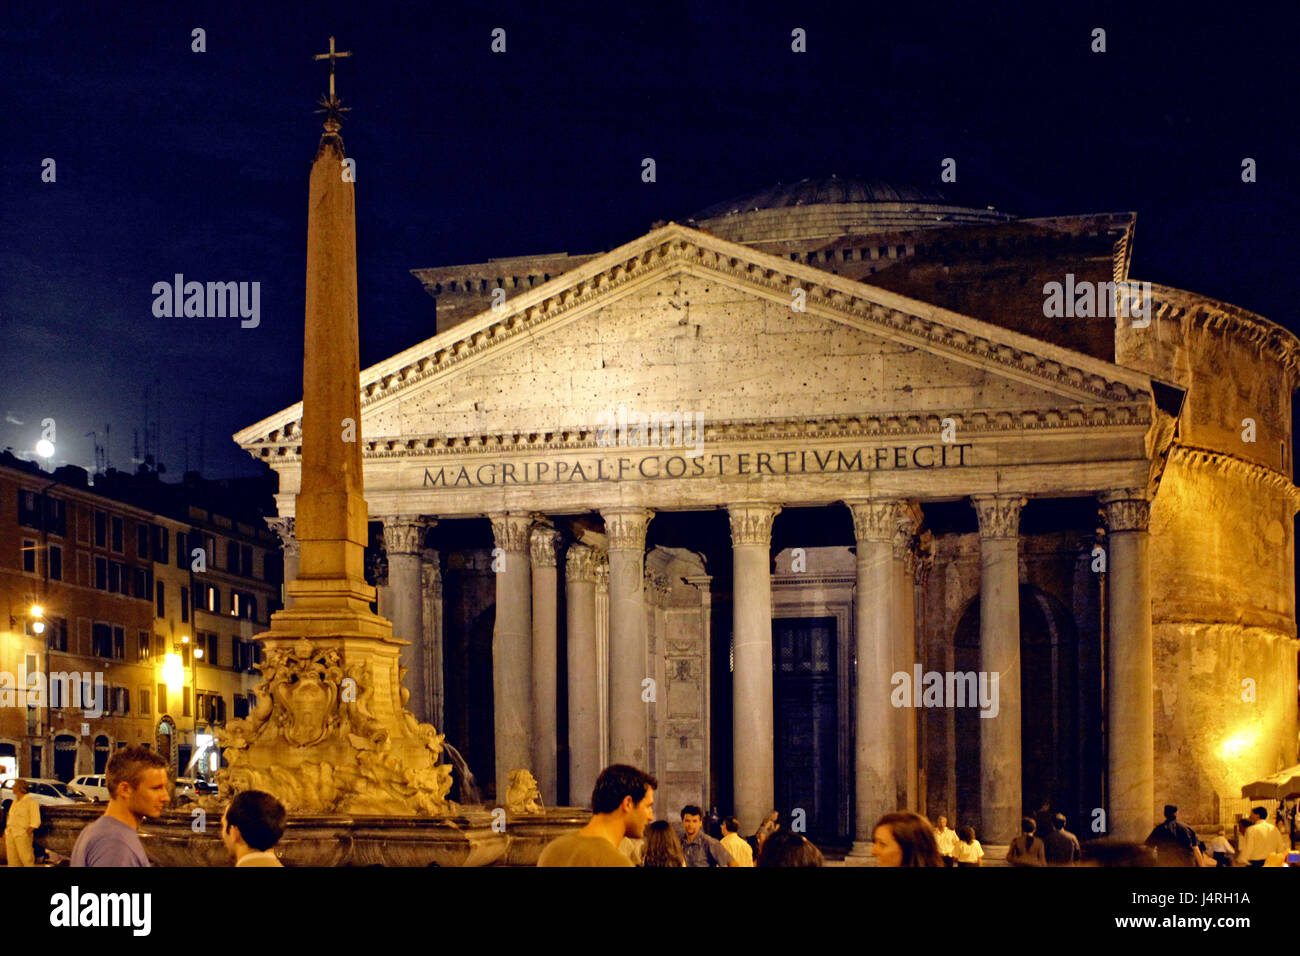 Italy, Rome, pantheon at night, tourists, no model release, Stock Photo